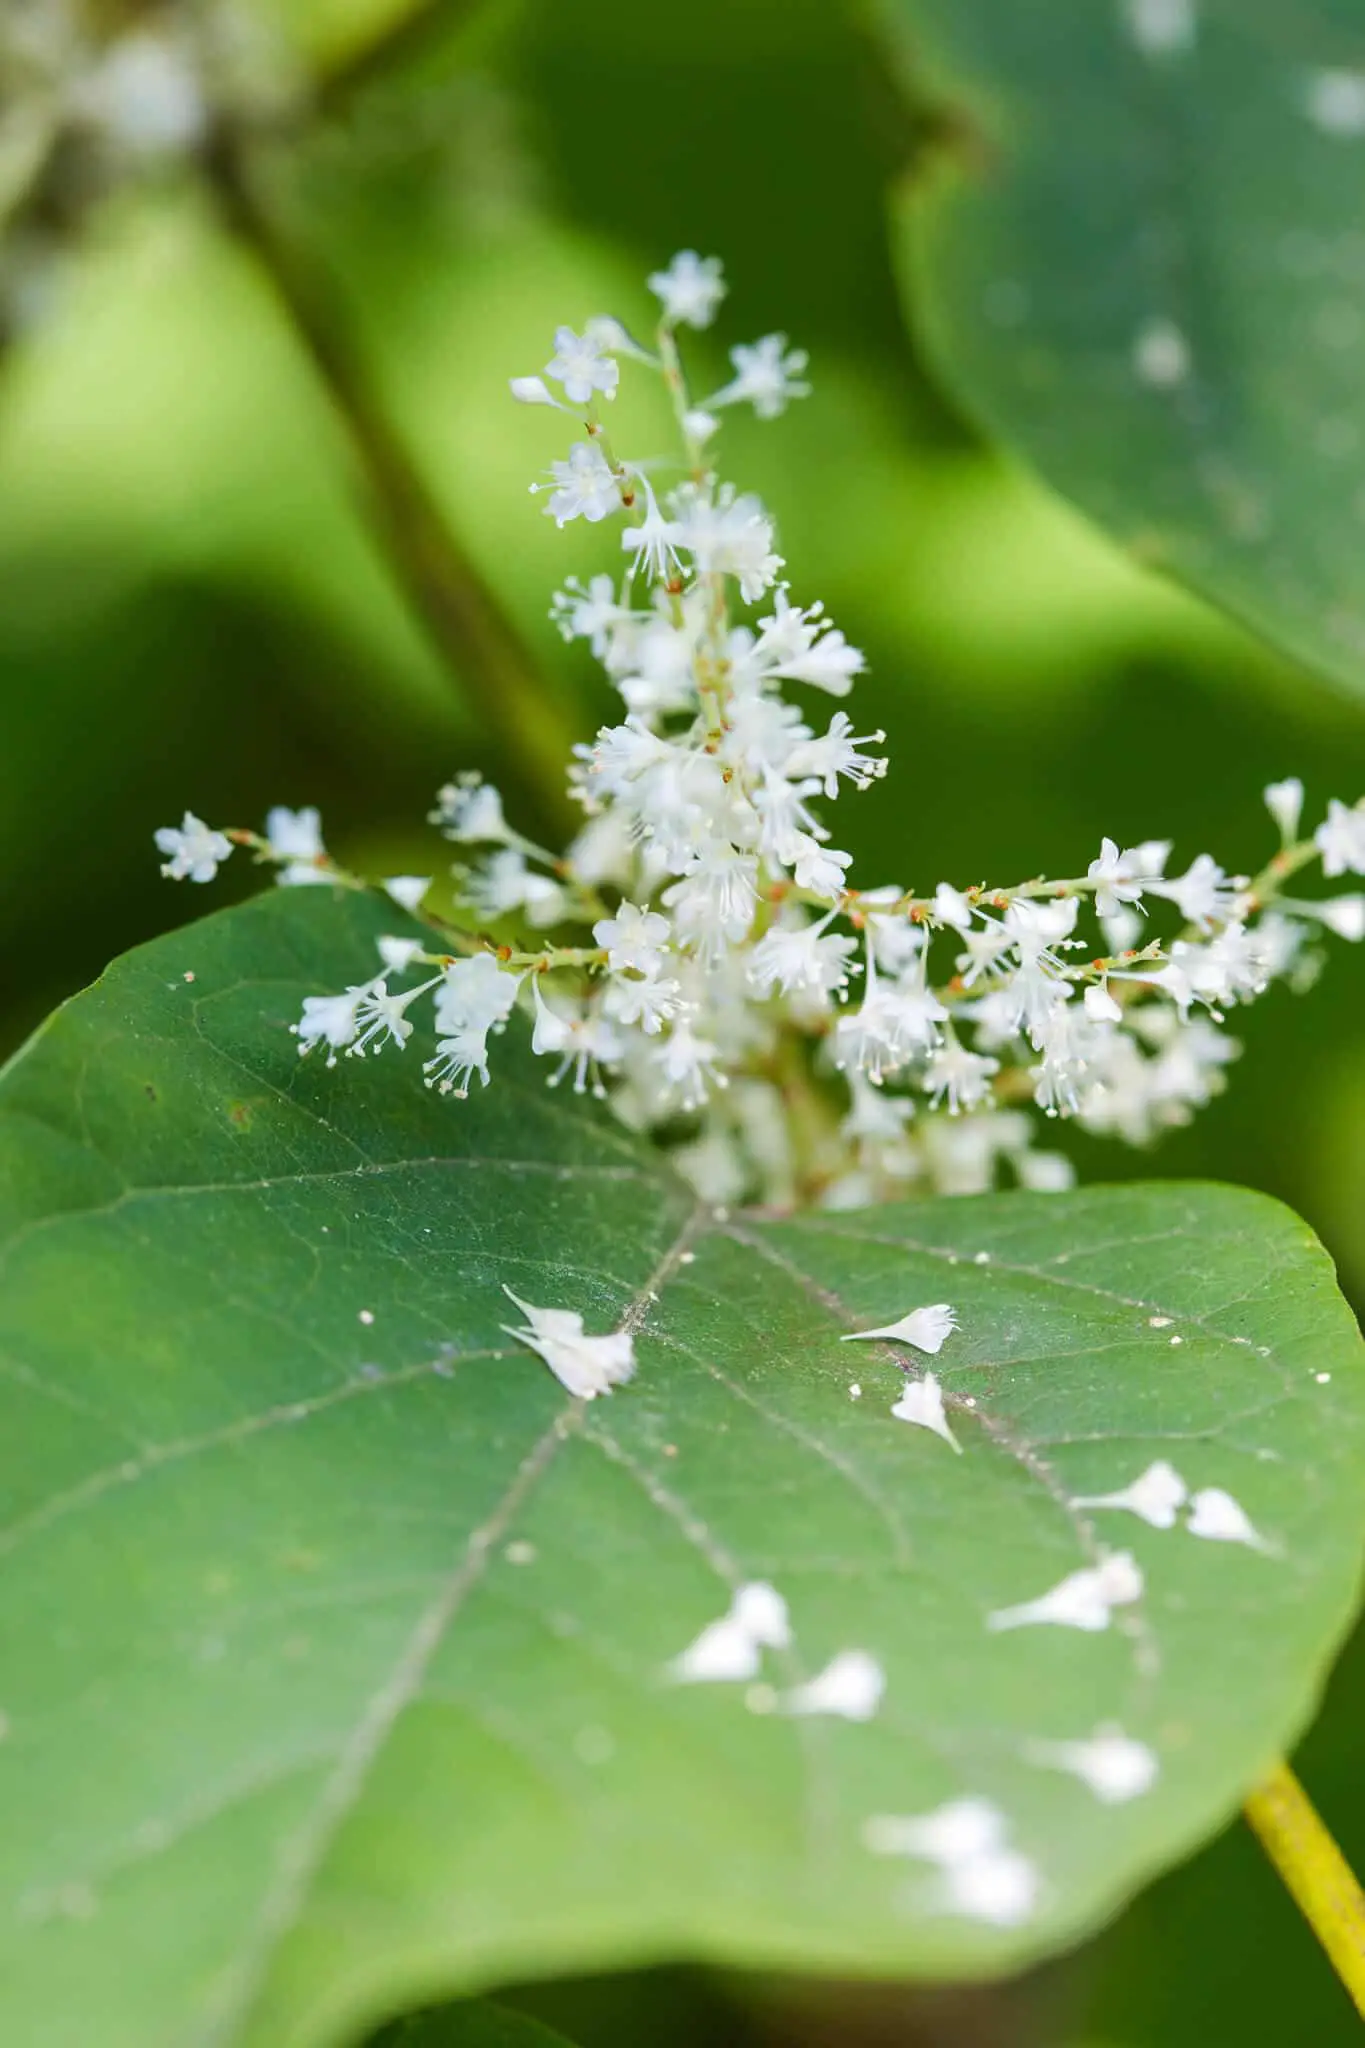 The Japanese knotweed flowers in late summer and its panicles cover the ground extensively